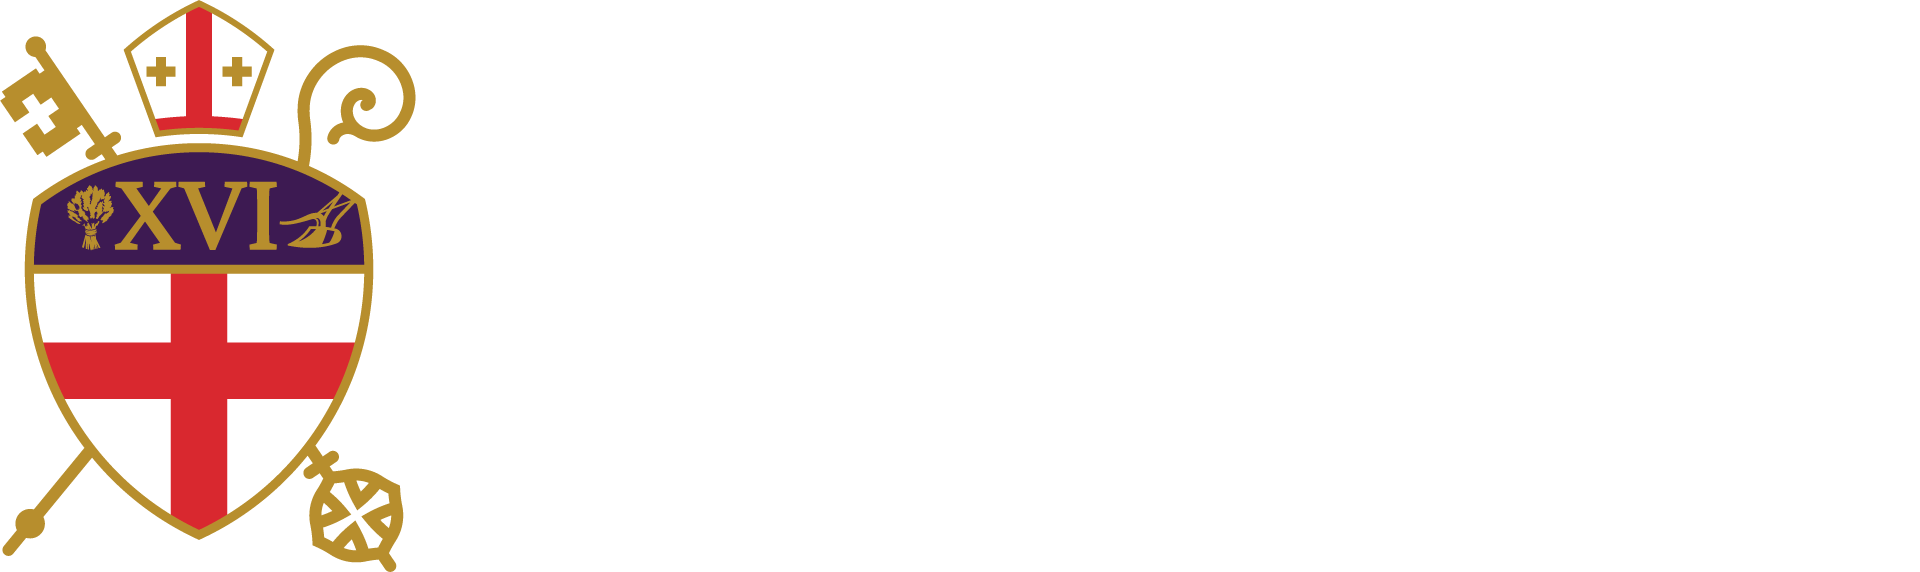 Episcopal Diocese of Tennessee - Open, Obedient, Responsive